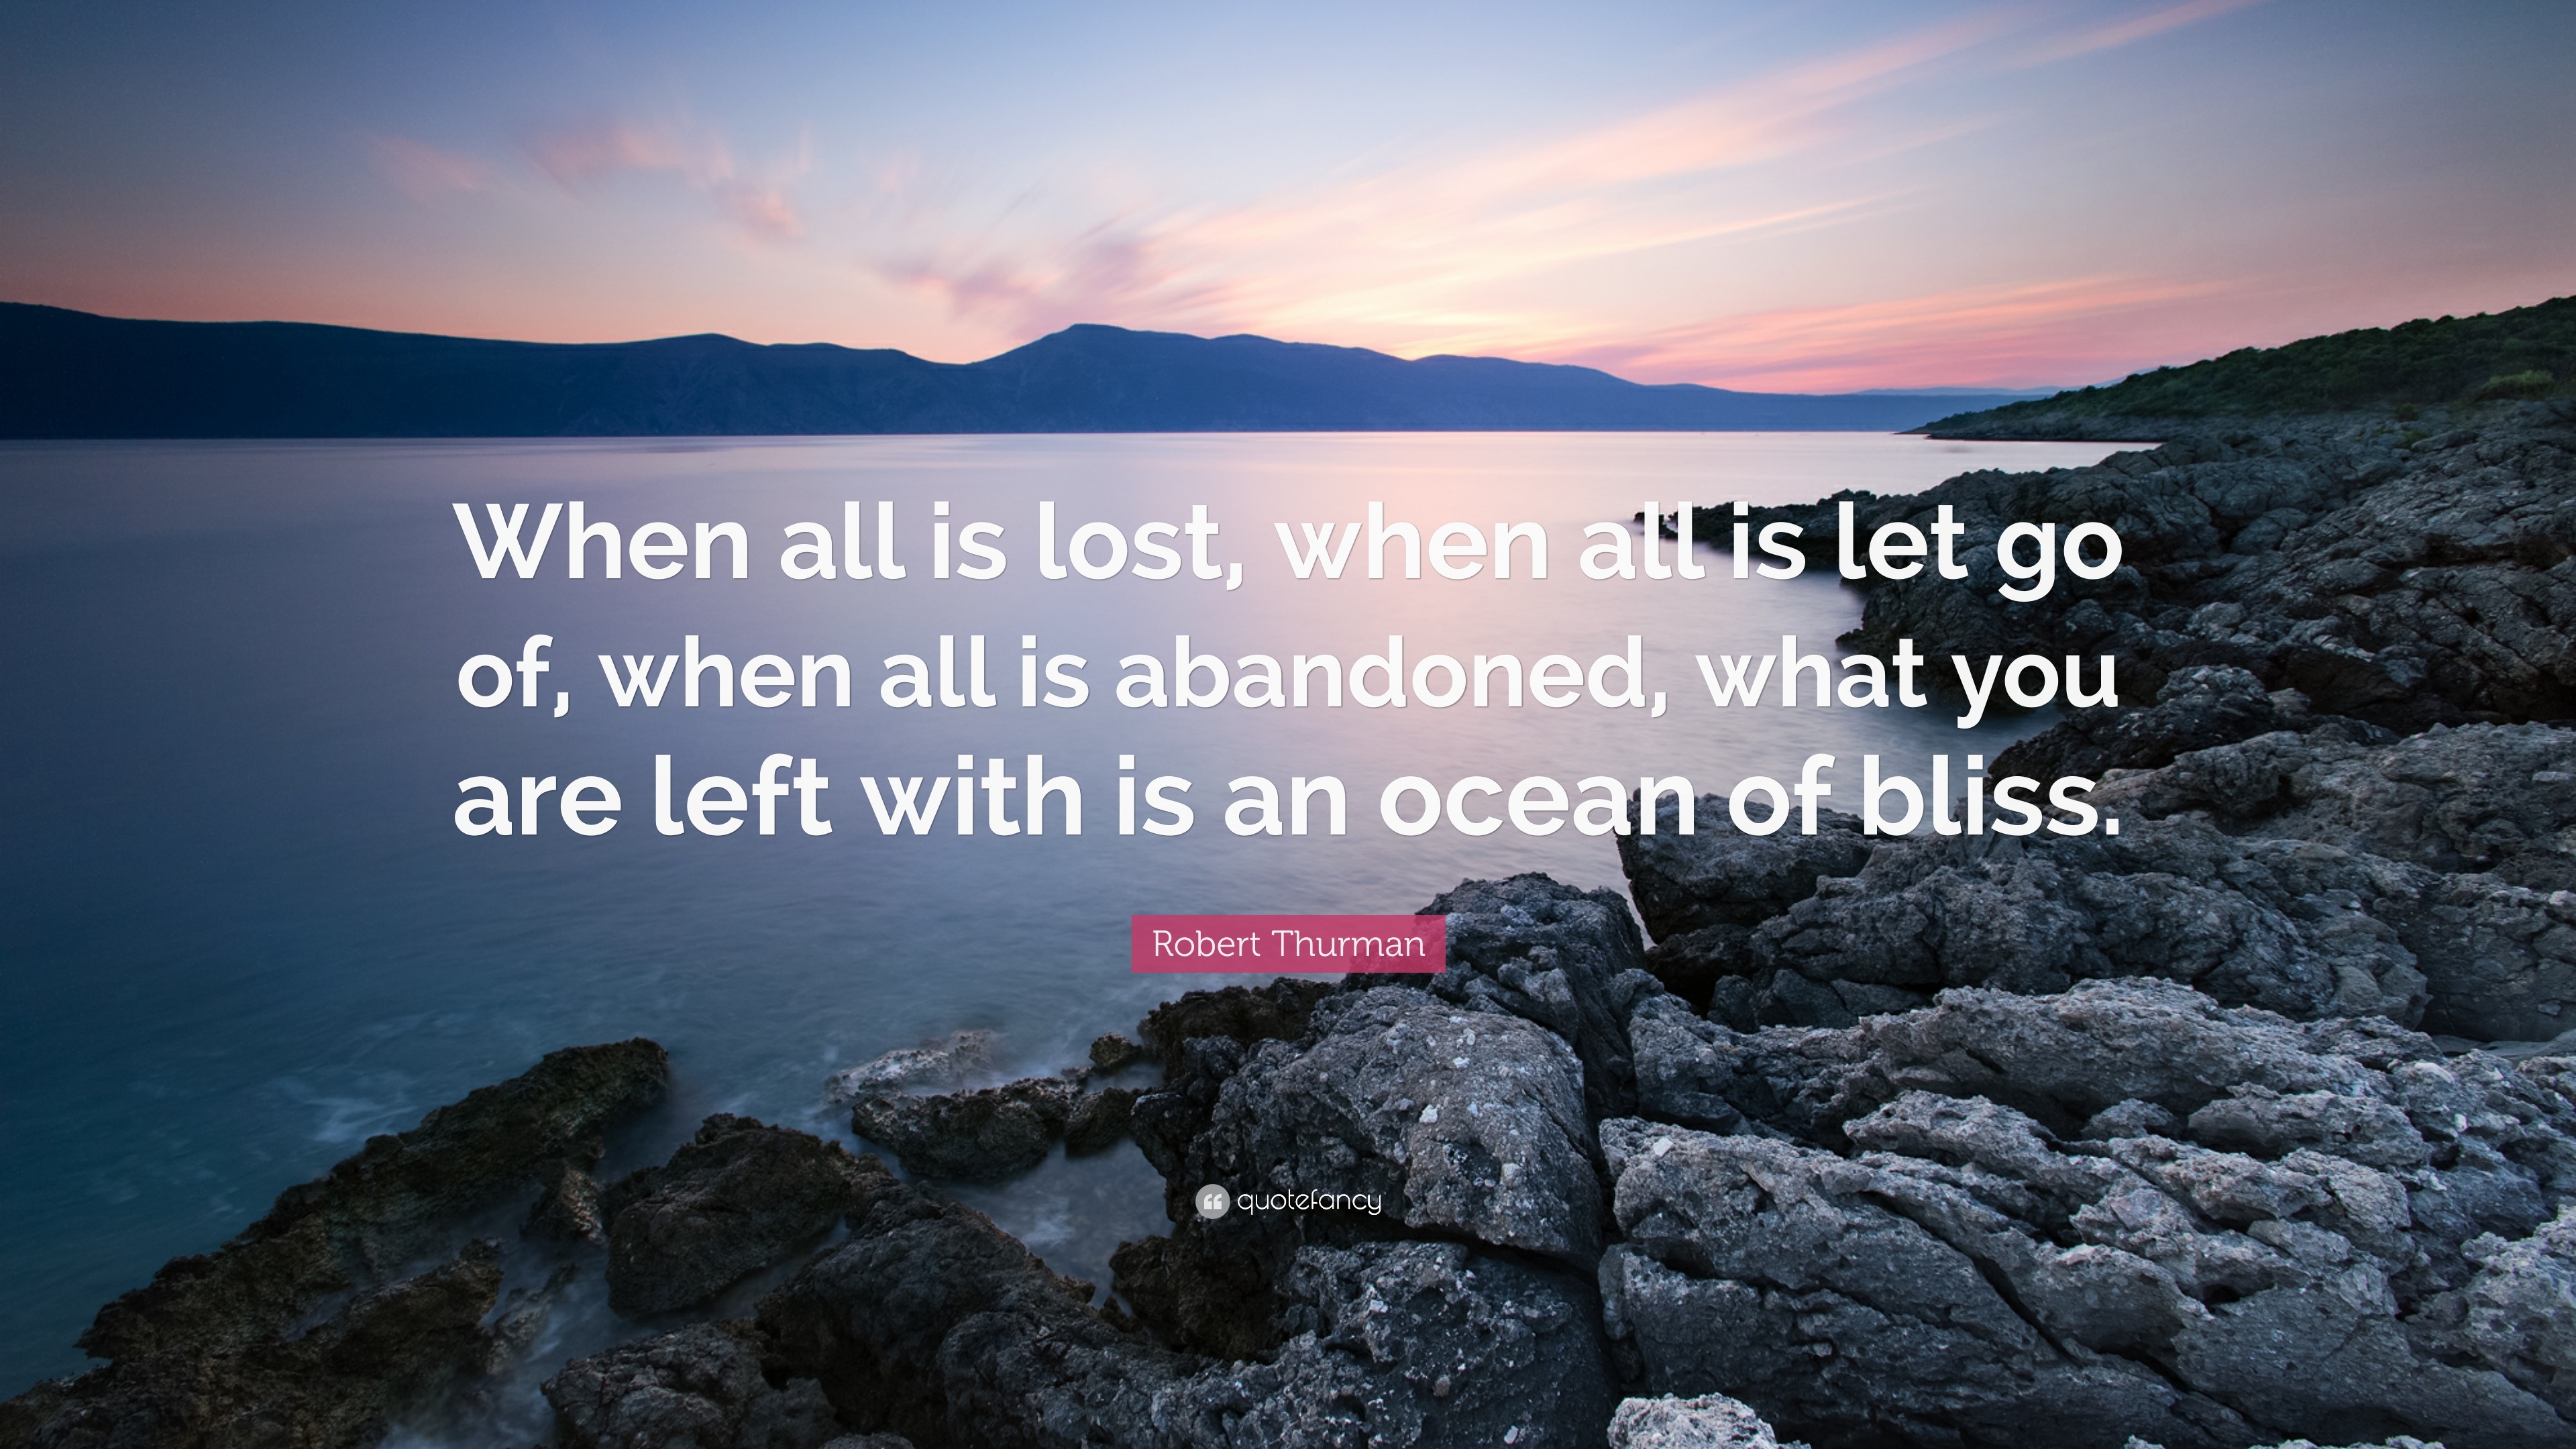 Robert Thurman Quote: “When all is lost, when all is let go of, when all is